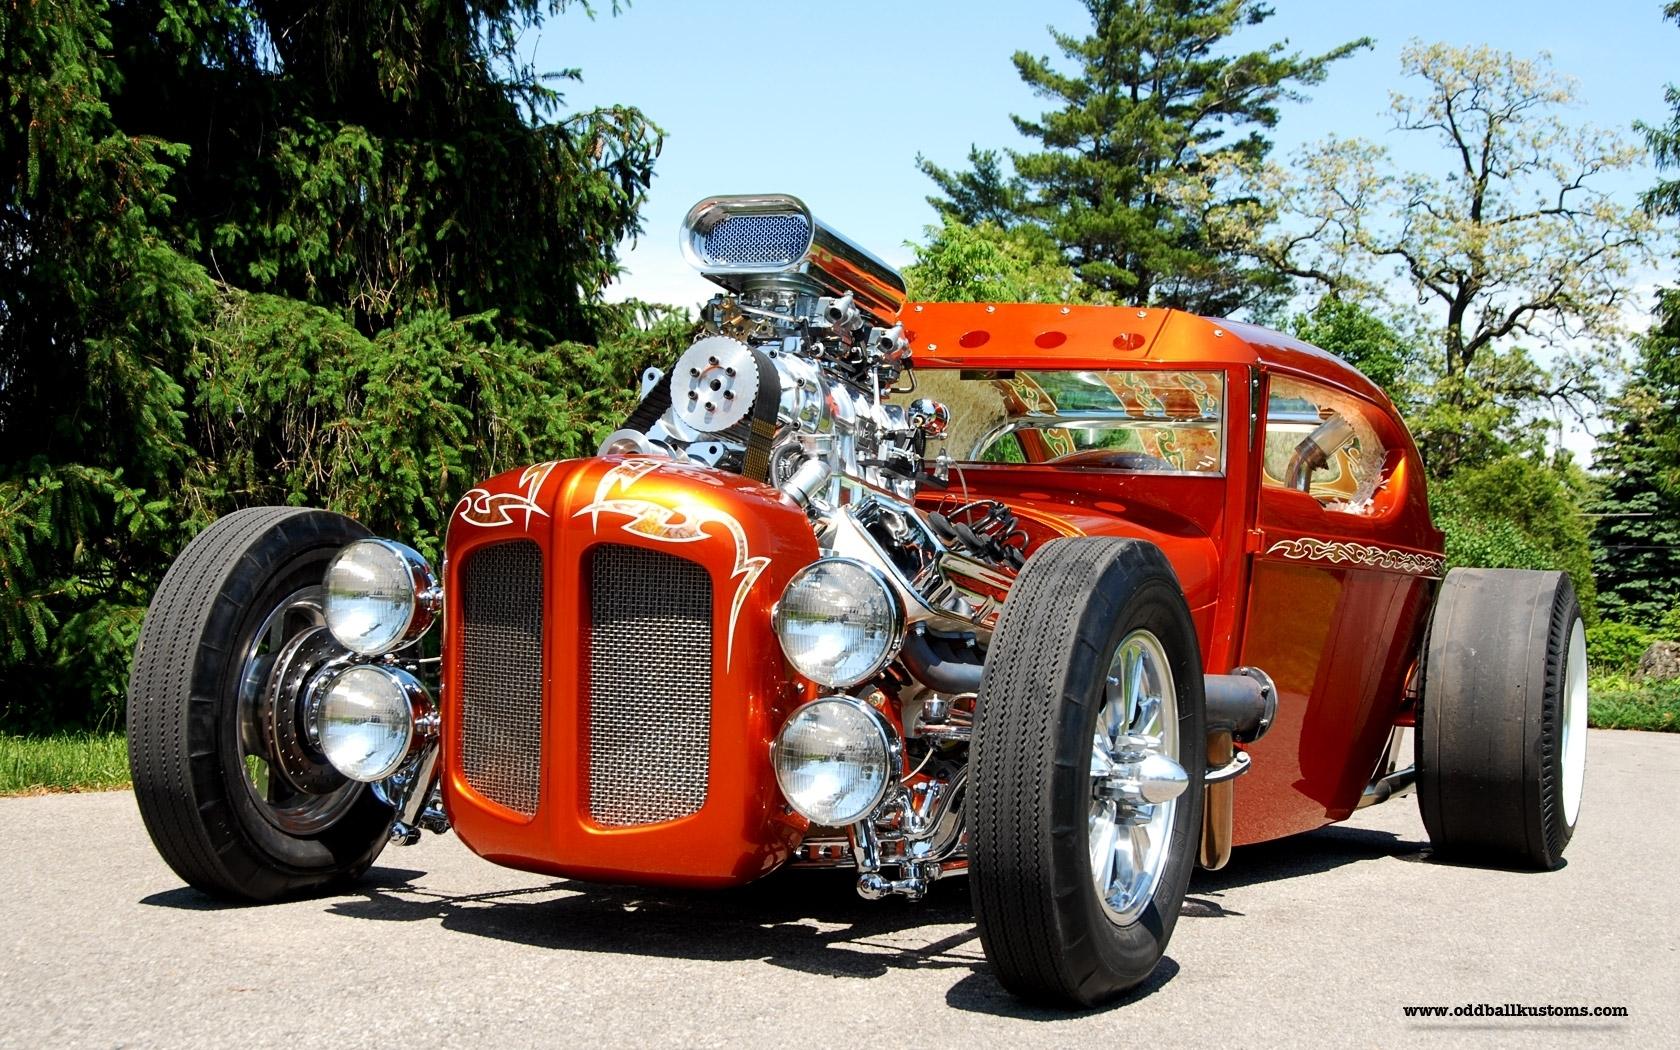 Classic Hot Rod... Wrong gallery.